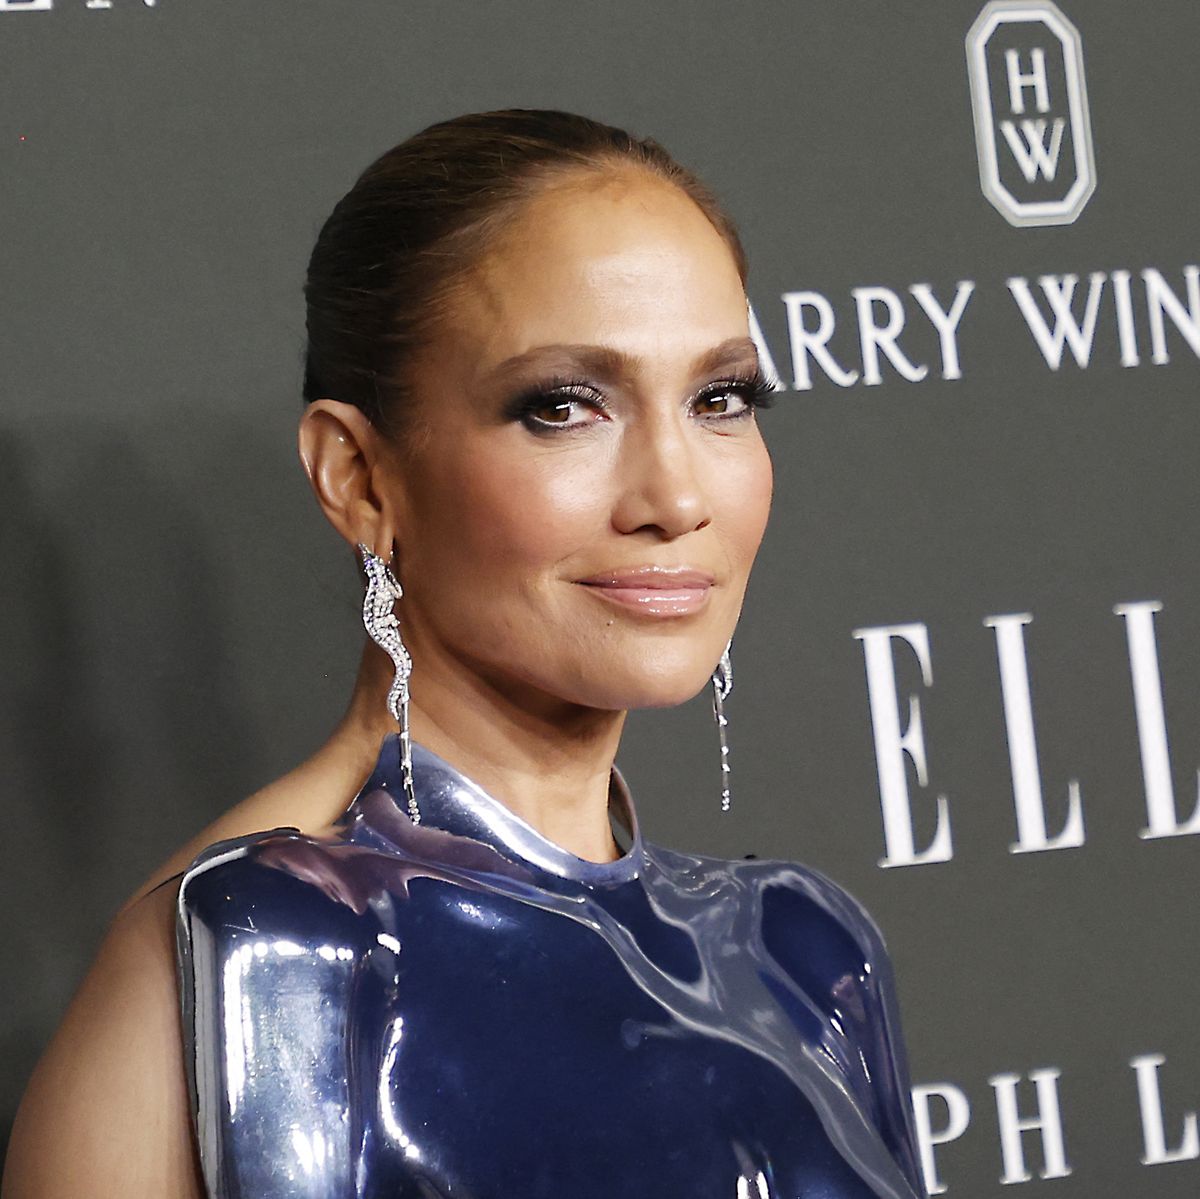 Jennifer Lopez Has Toned Abs In A Cropped Breastplate In IG Pics